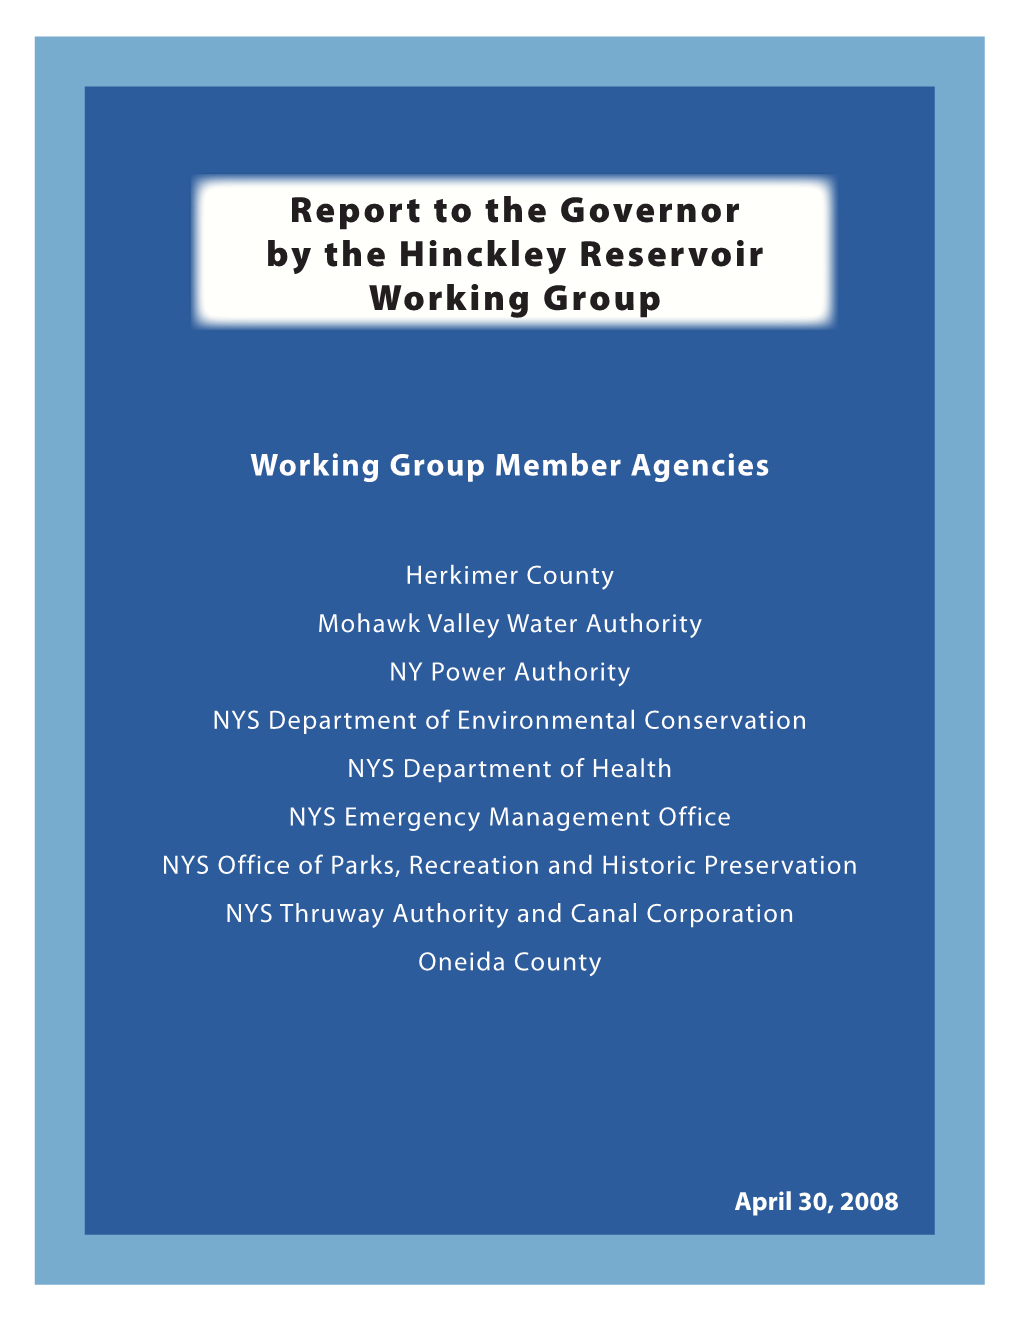 Report to the Governor by the Hinckley Reservoir Working Group